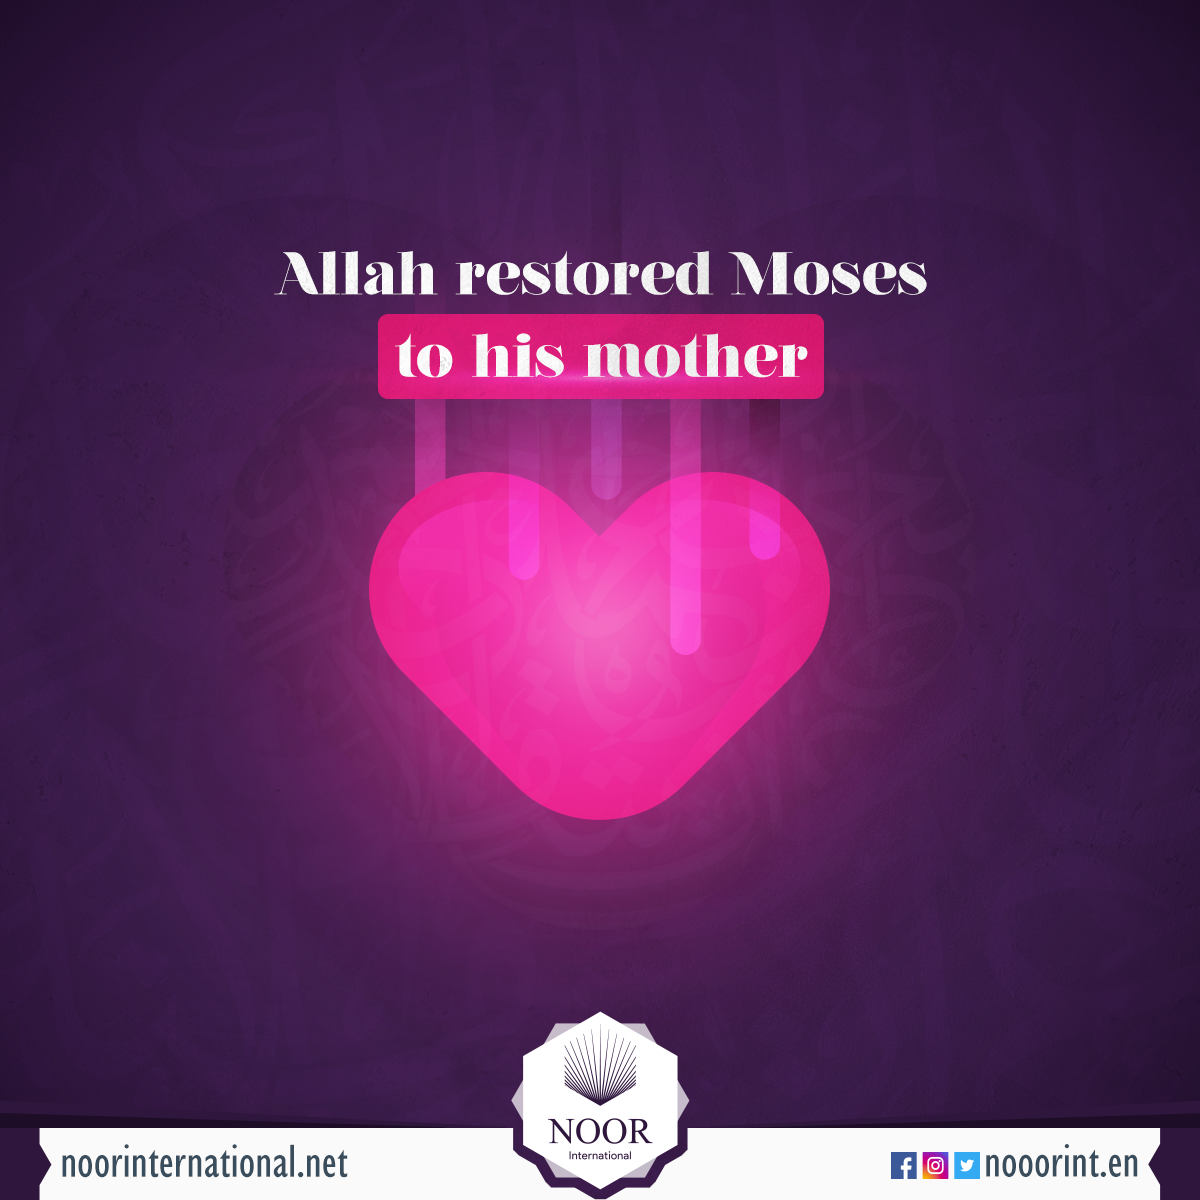 Allah restored Moses to his mother